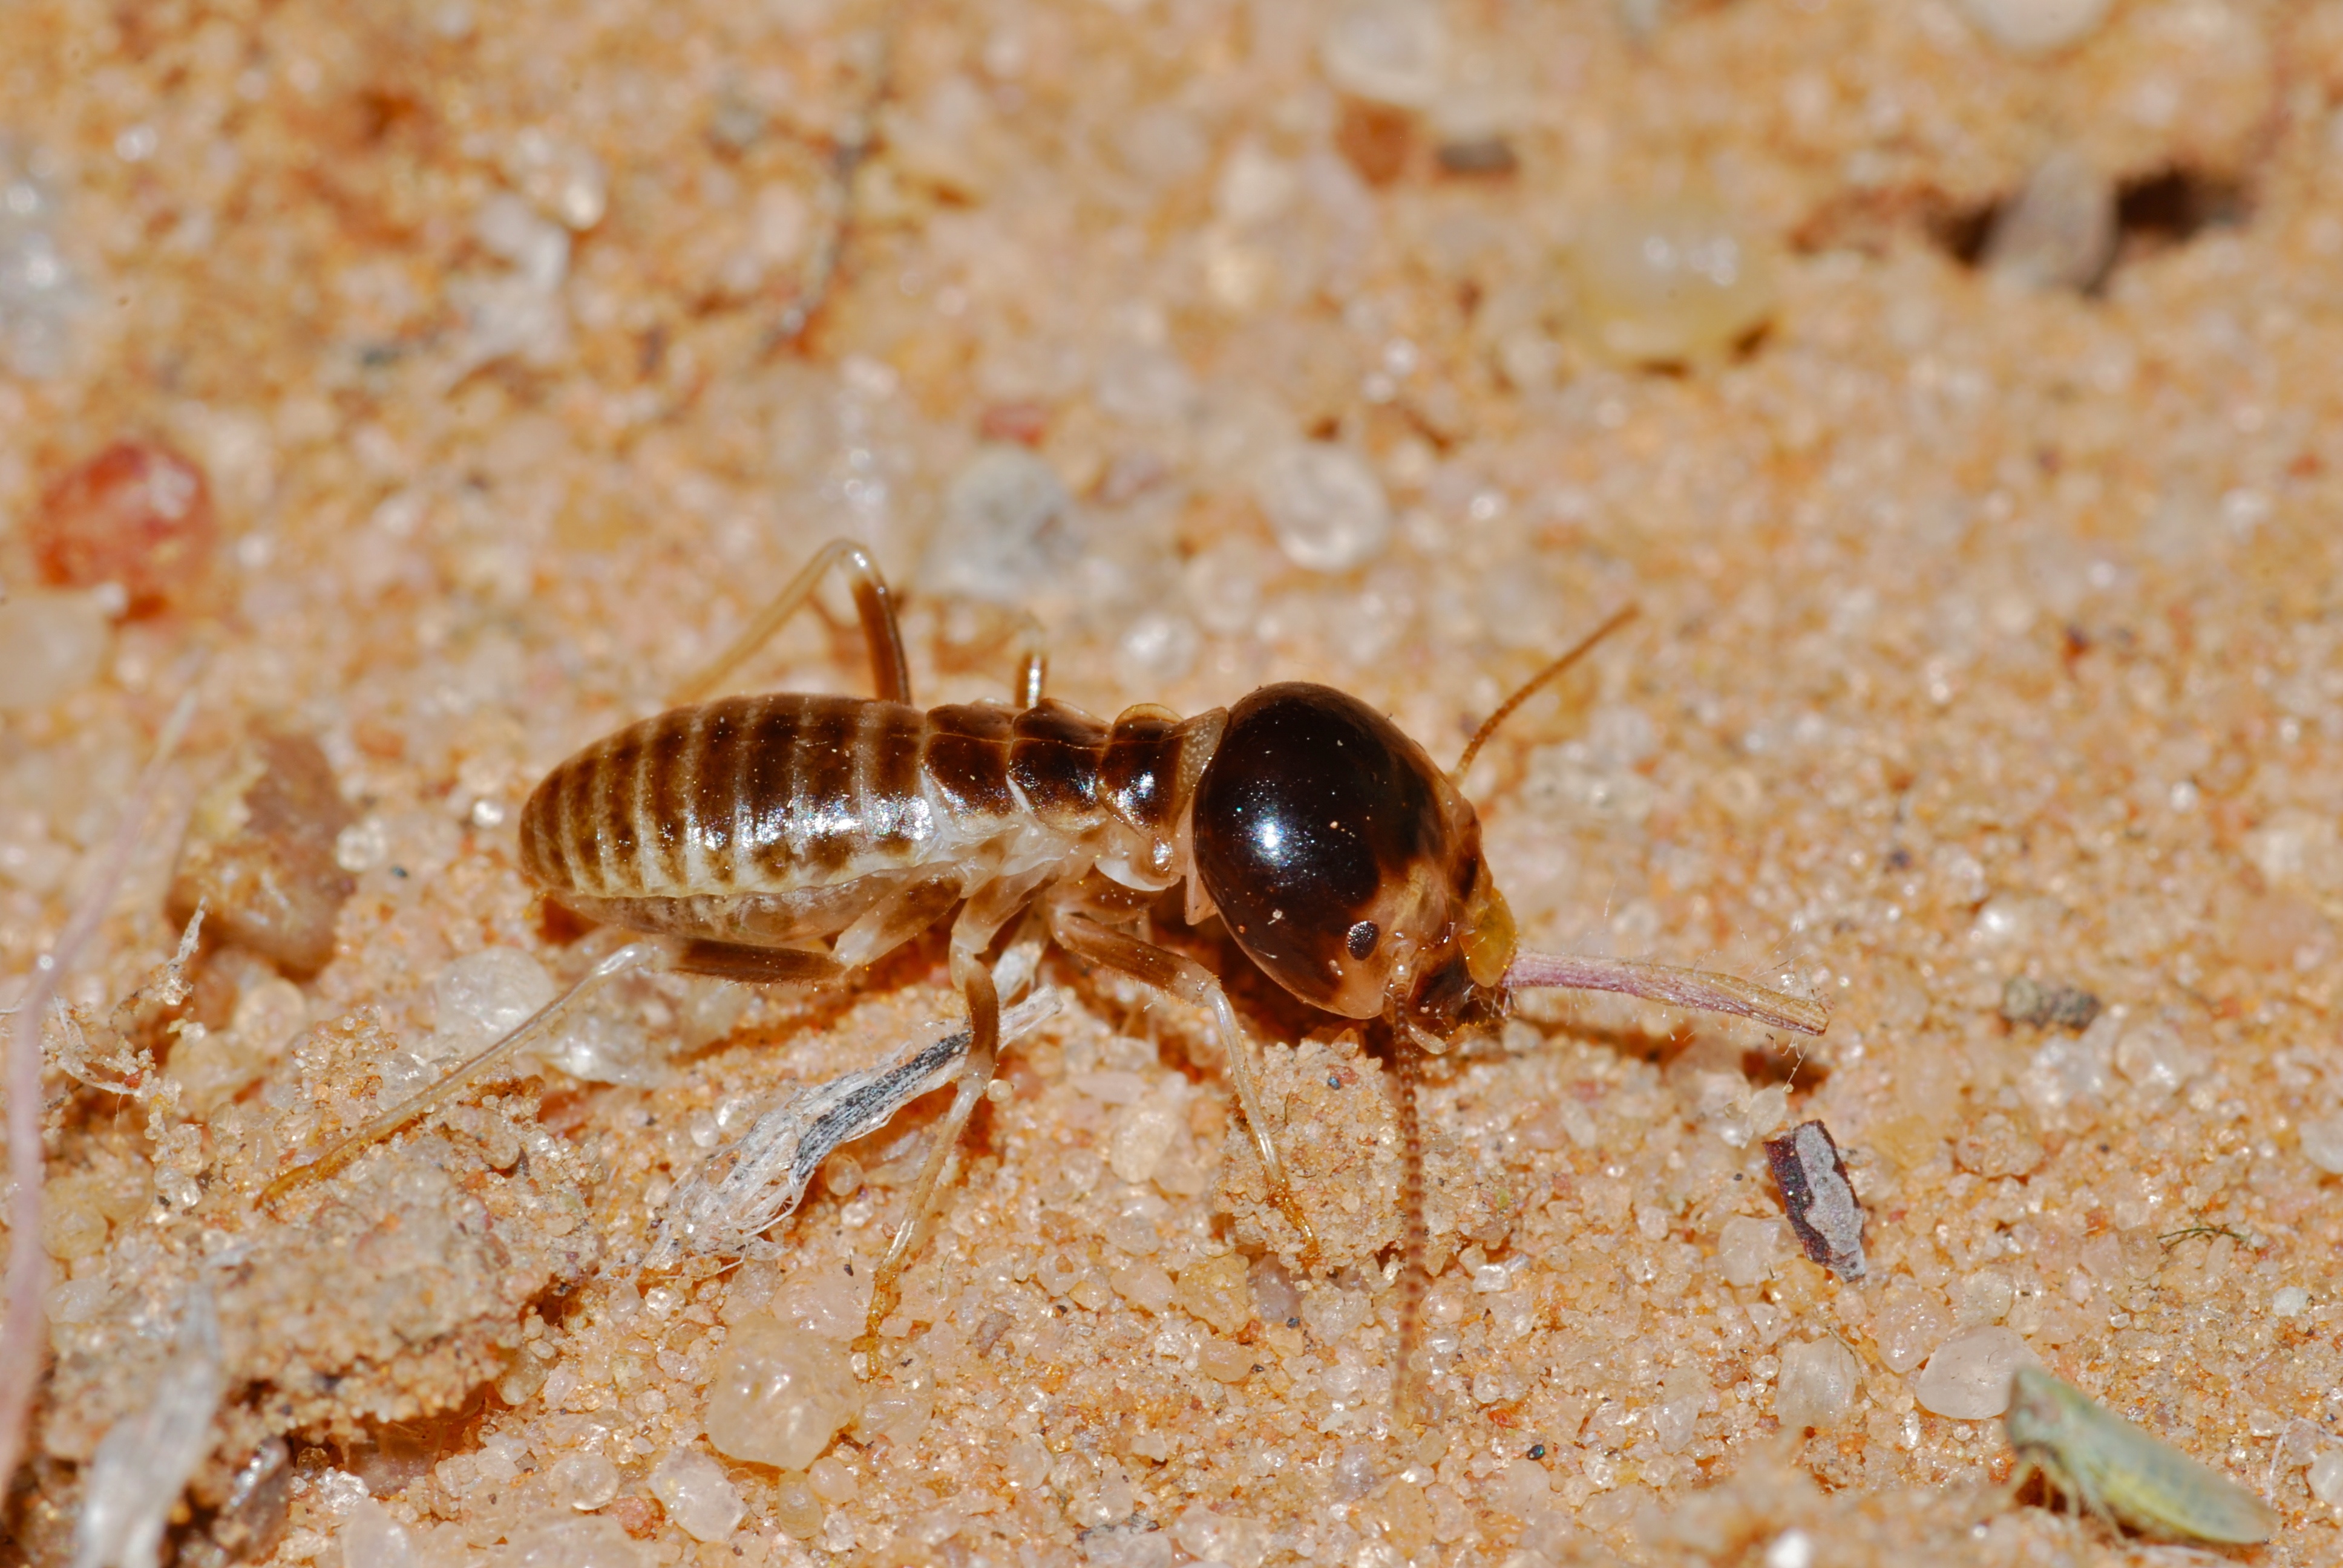 Northern Harvester Termite (Hodotermes mossambicus) (6883776162)